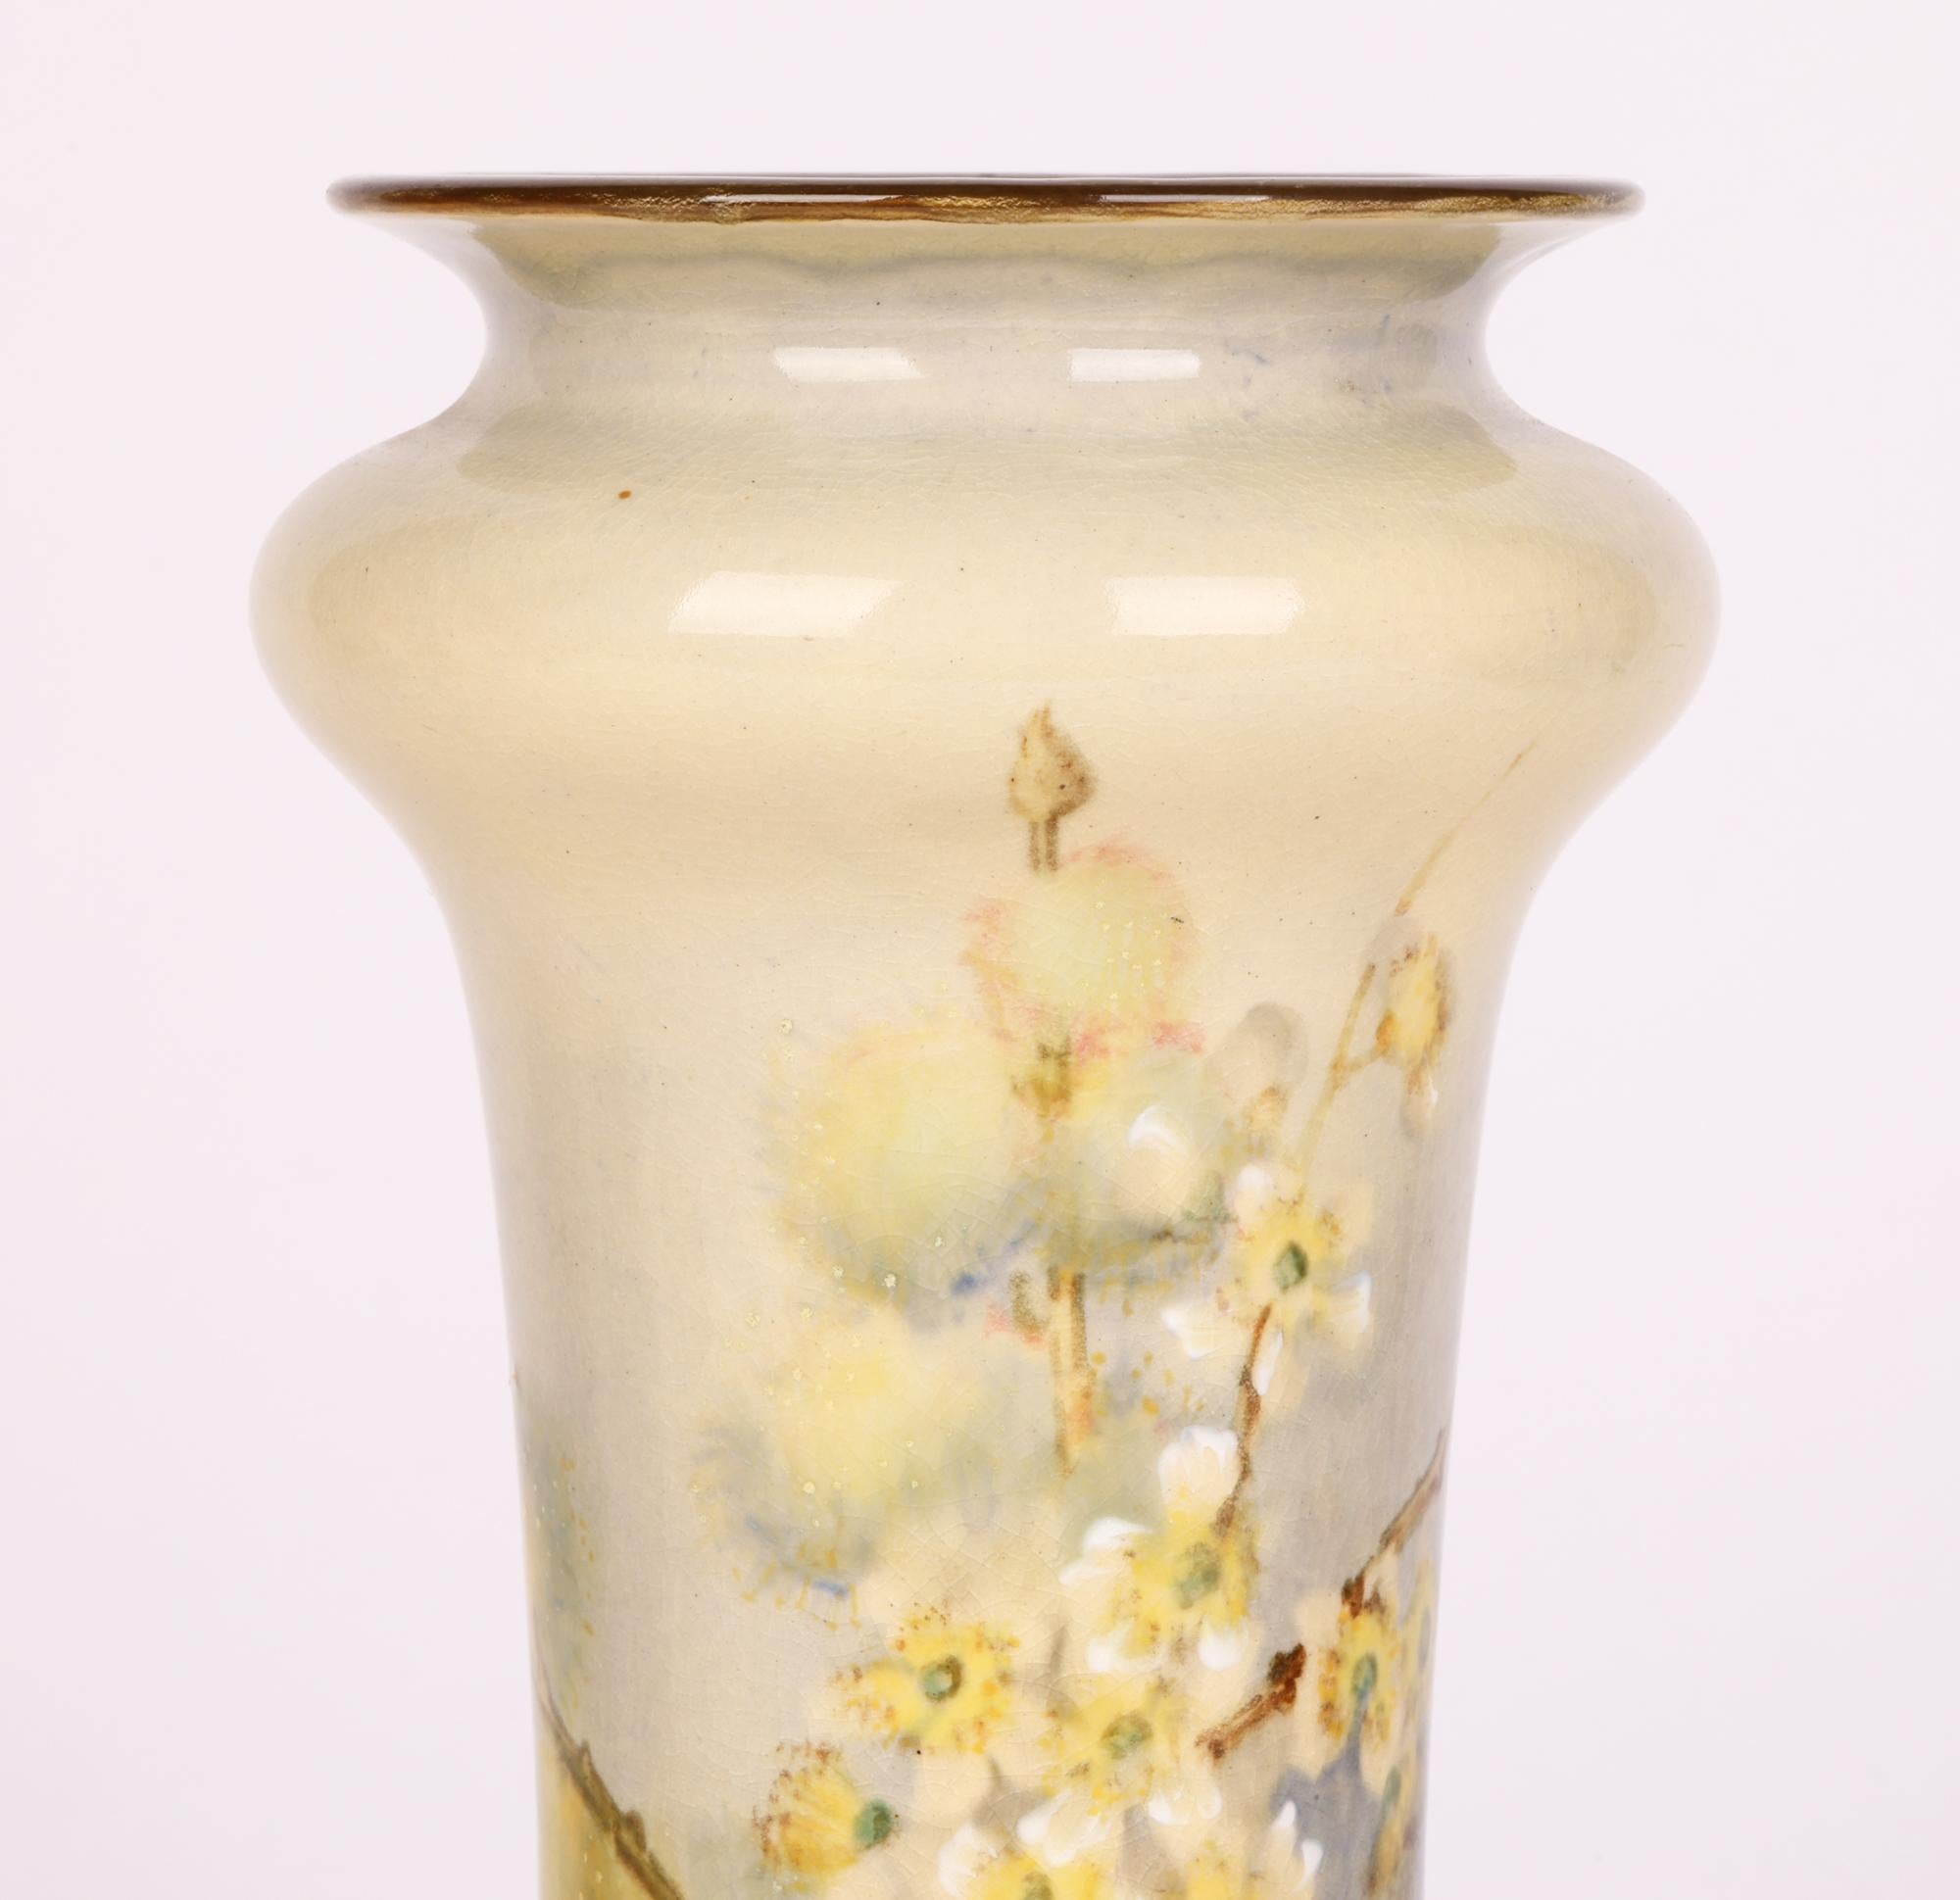 A stunning Arts & Crafts Doulton Lambeth Faience hand painted vase with yellow flowering stems by renowned artist Edith Jane Gillman and dating from around 1896. Edith Gillman joined Doulton Lambeth dated 1905 and was a talented flower painter who